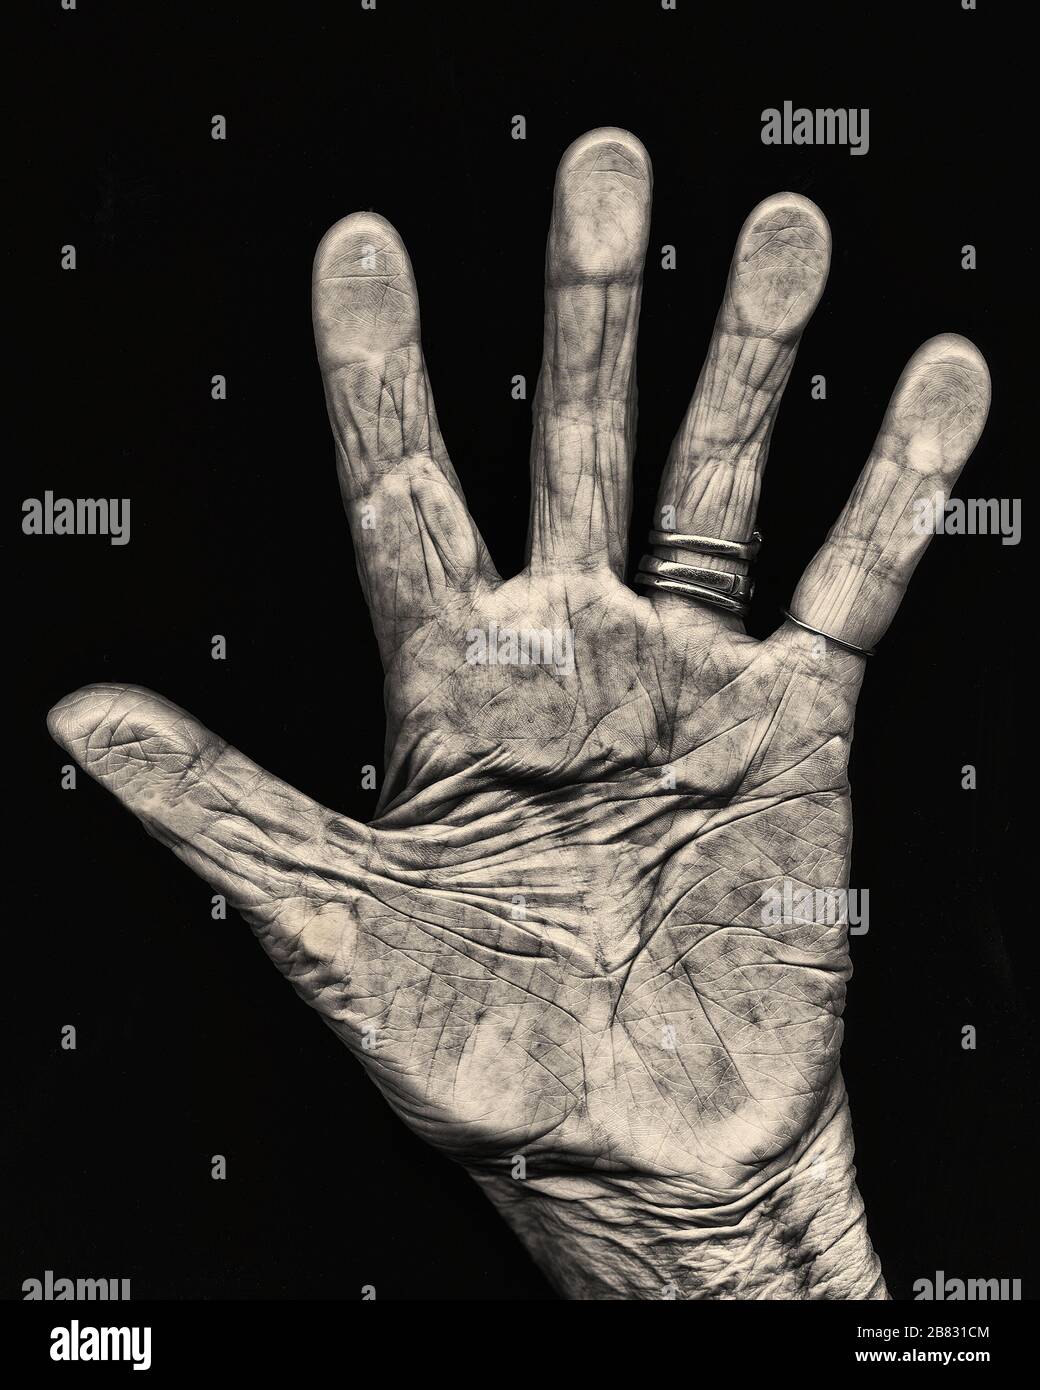 Elderly Hand against Black Background, Open with Palm Facing Camera Stock Photo